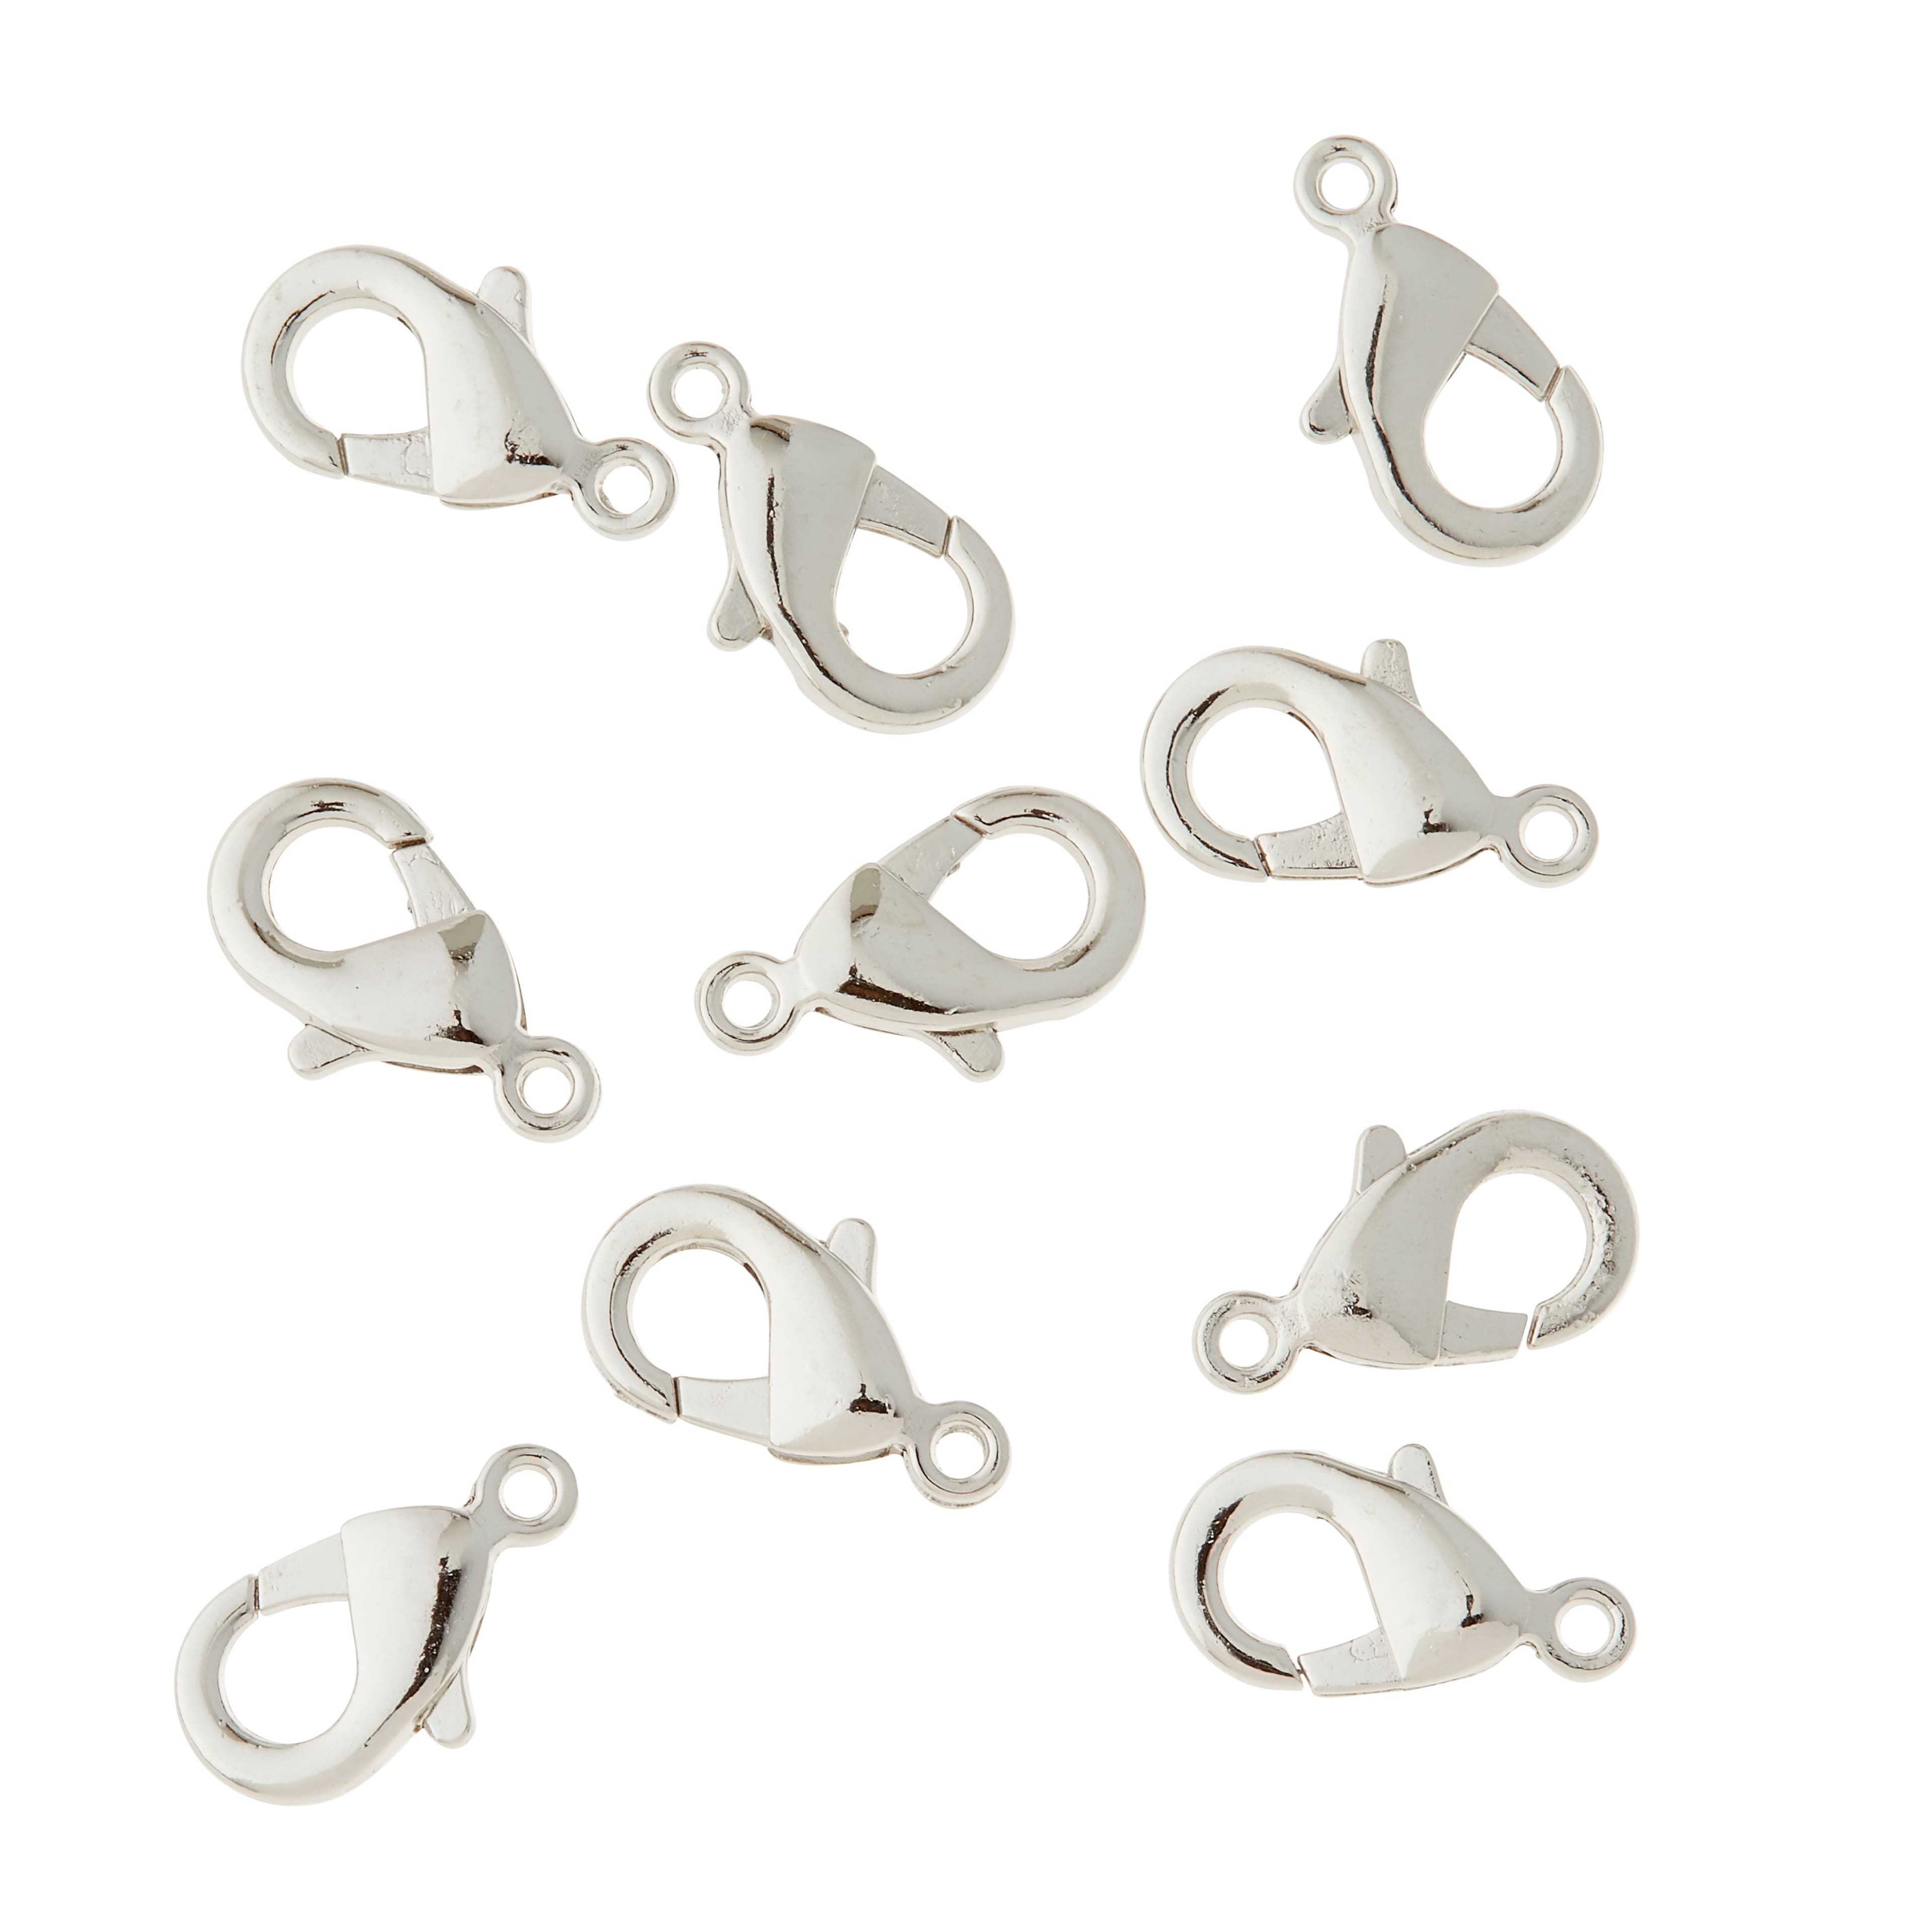 12 Packs: 10 ct. (120 total) Lobster Claw Clasps by Bead Landing™